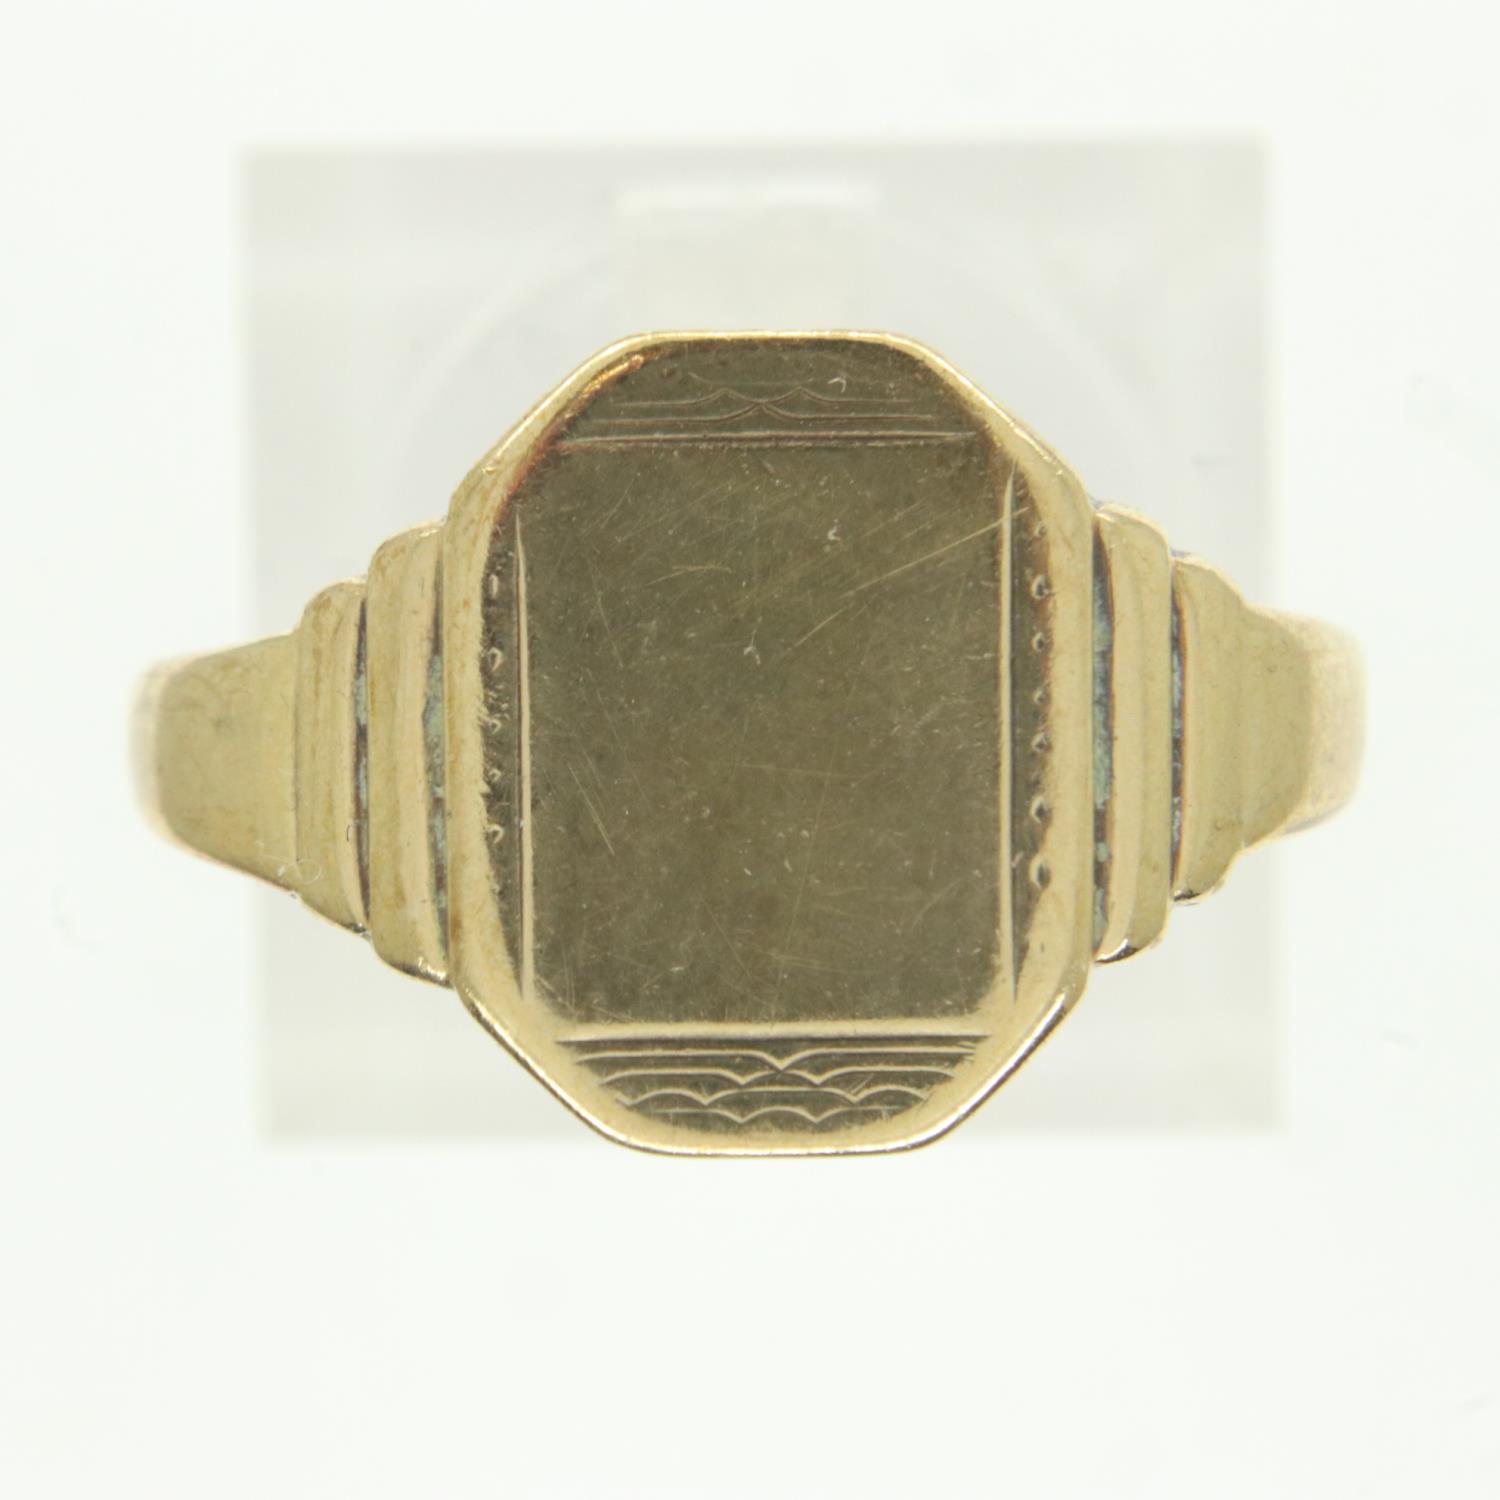 9ct gold signet ring, size Q, 2.3g. UK P&P Group 0 (£6+VAT for the first lot and £1+VAT for